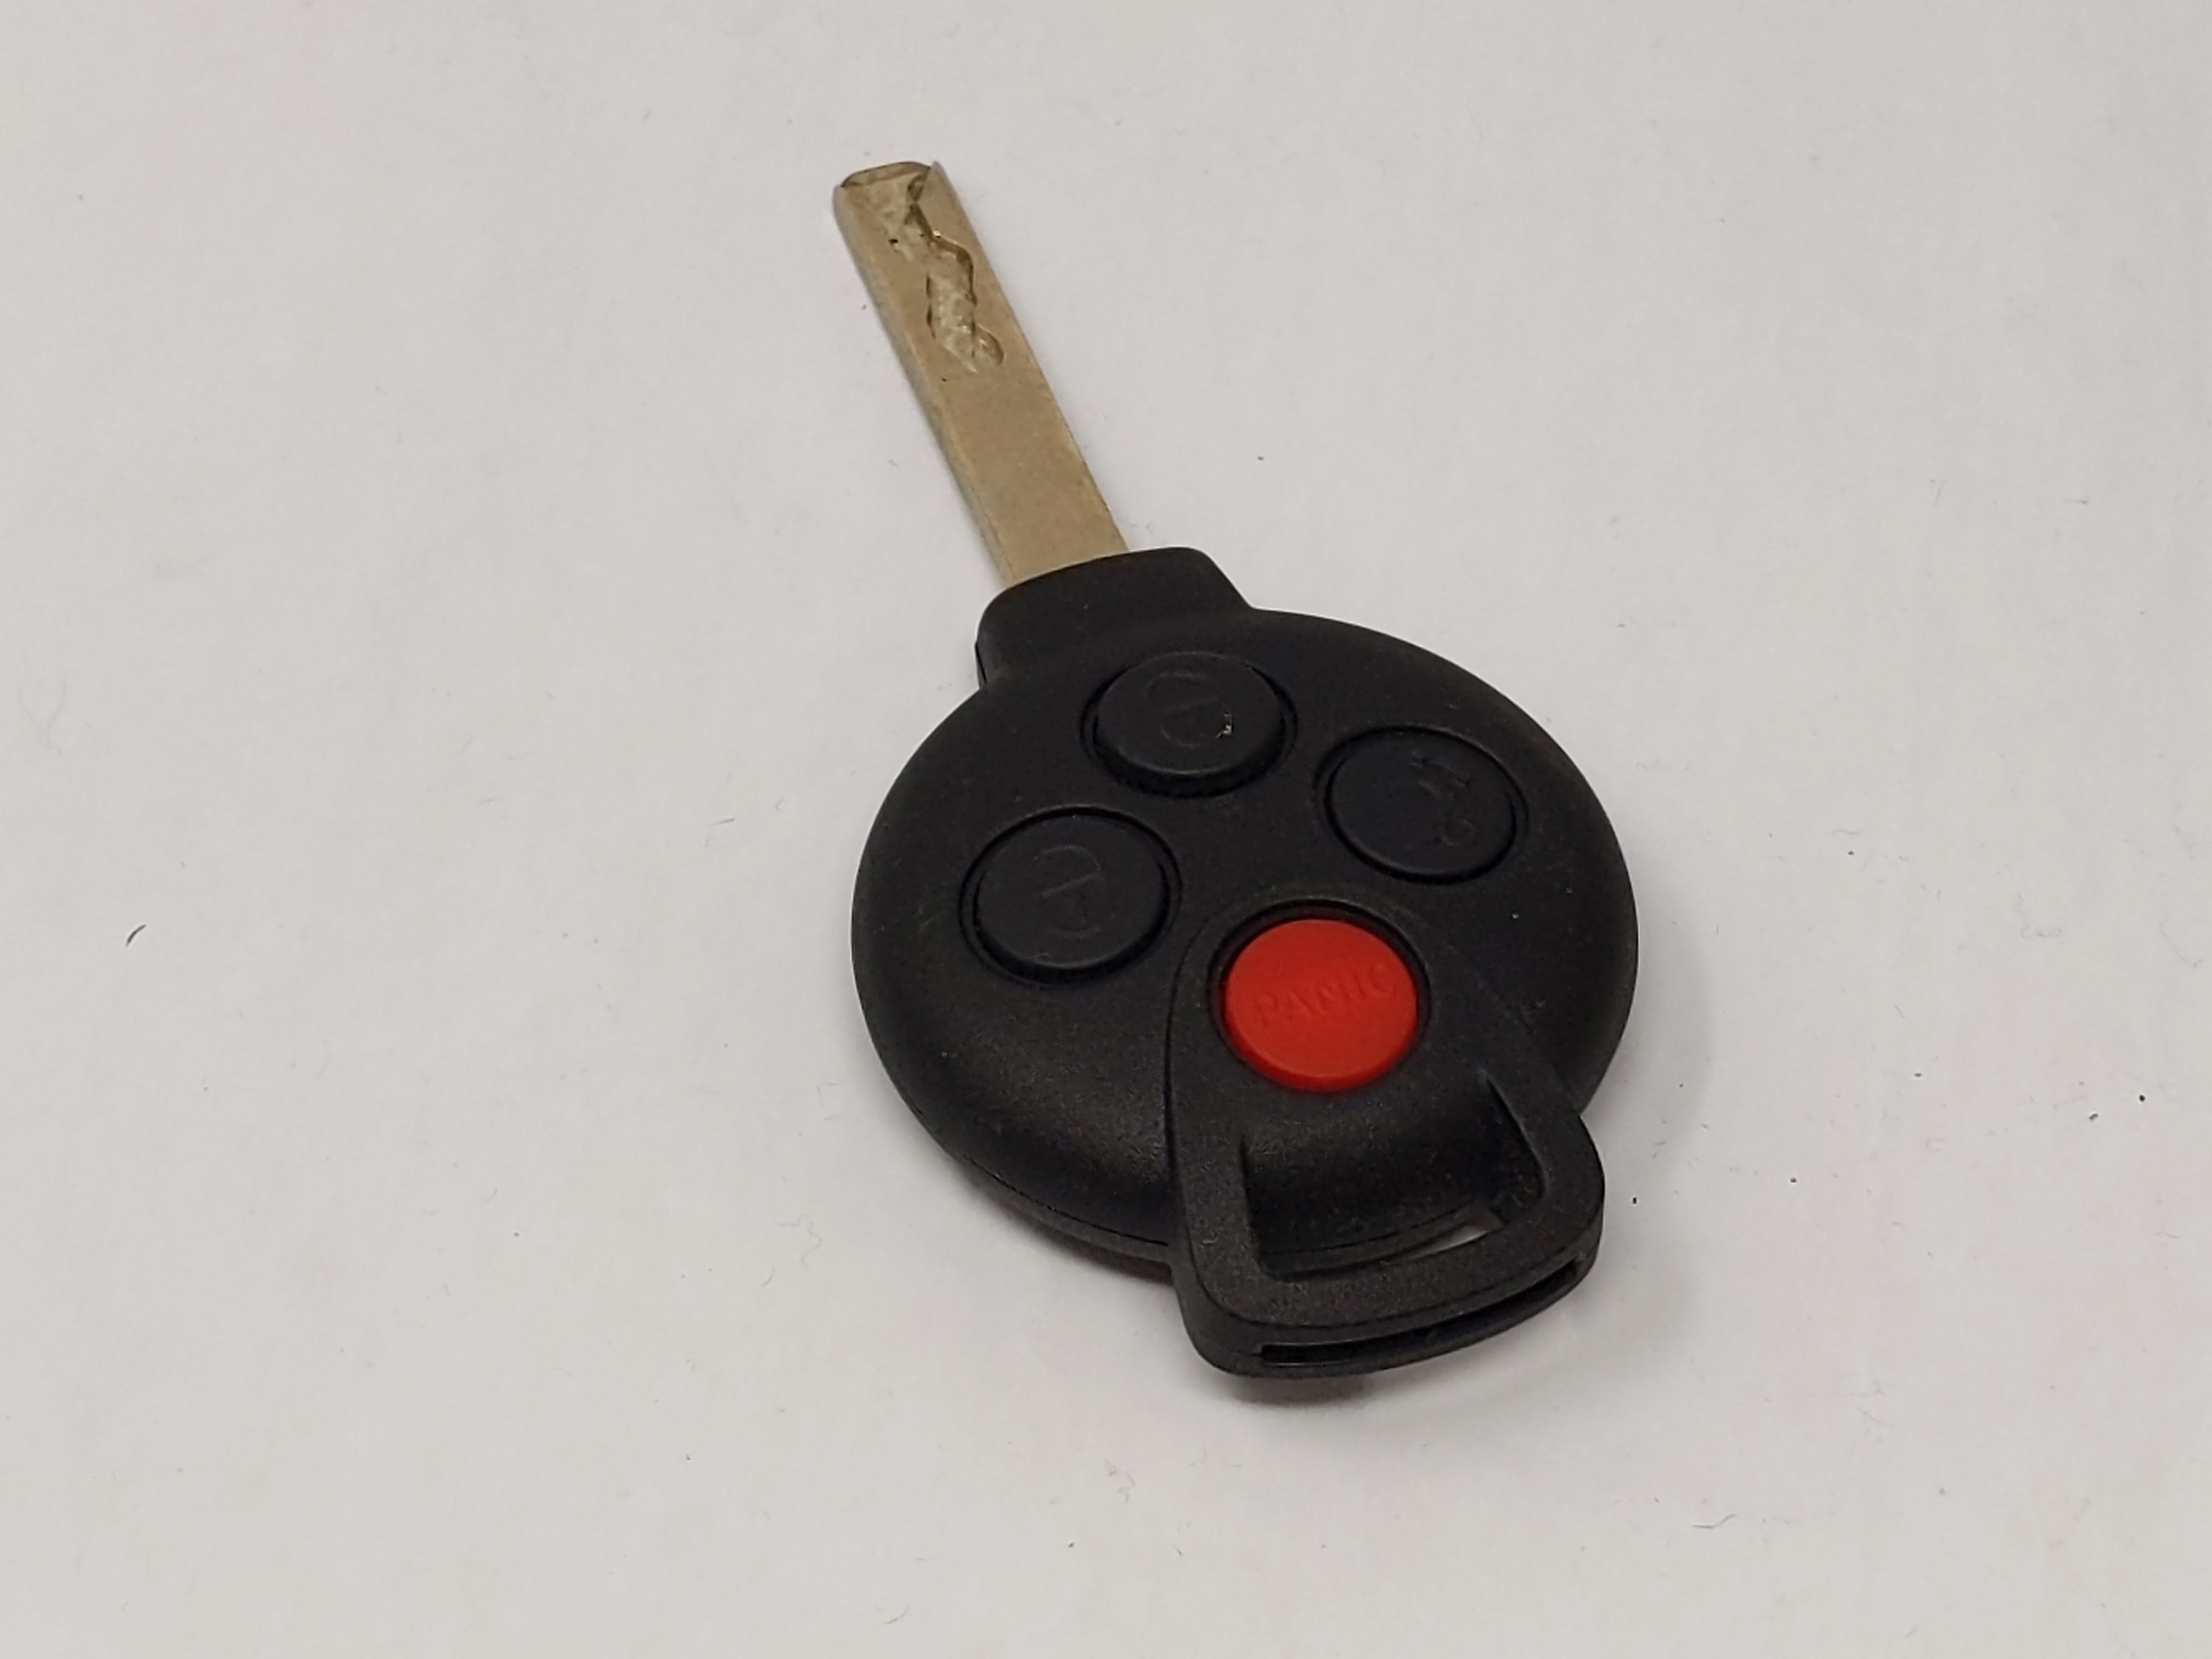 2005-2015 Smart Fortwo Keyless Entry Remote Kr55wk45144 267t-5wk45144 4 - Oemusedautoparts1.com